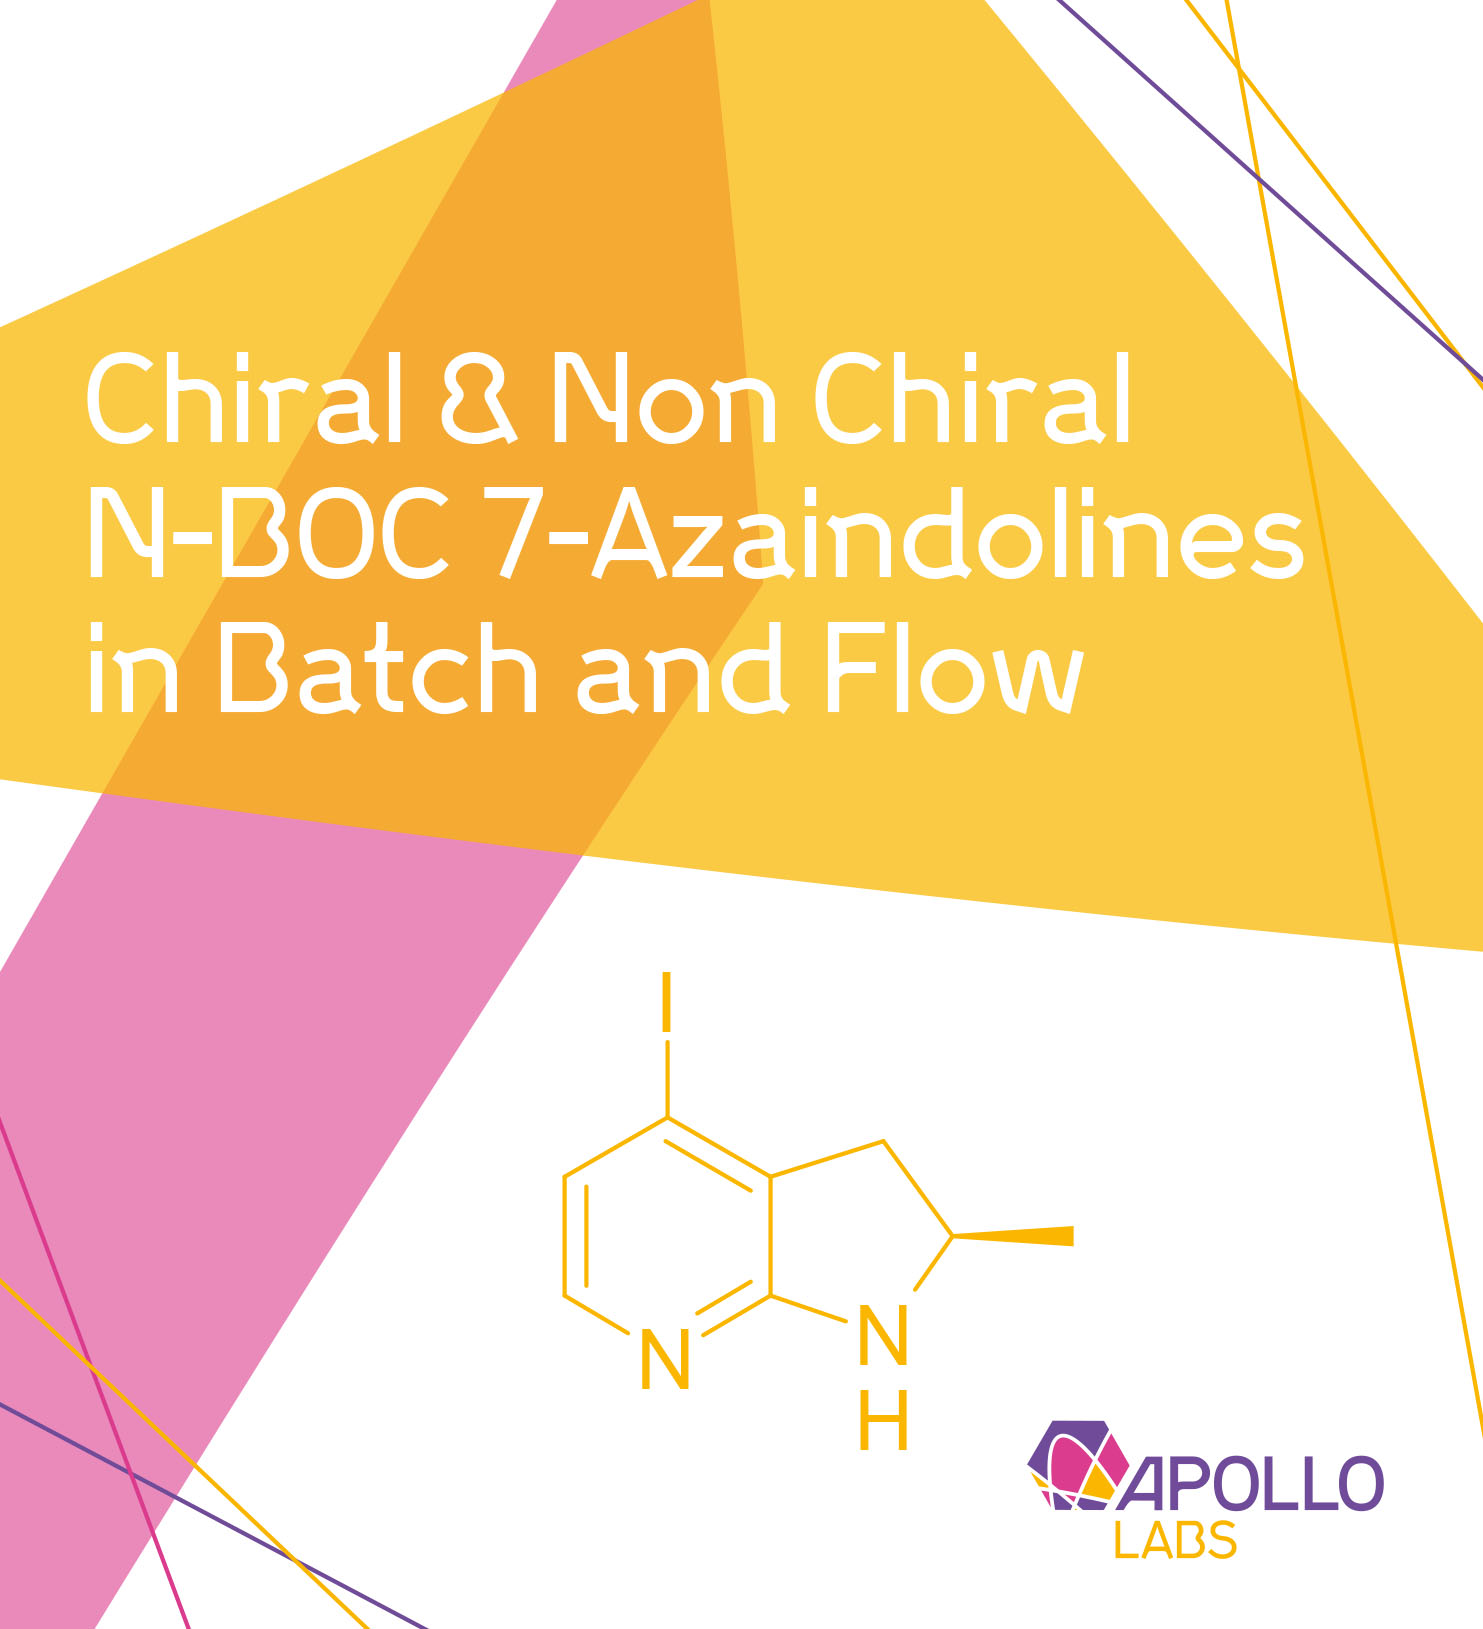 Chiral & Non Chiral N-BOC 7-Azaindolines in Batch and Flow thumbnail image